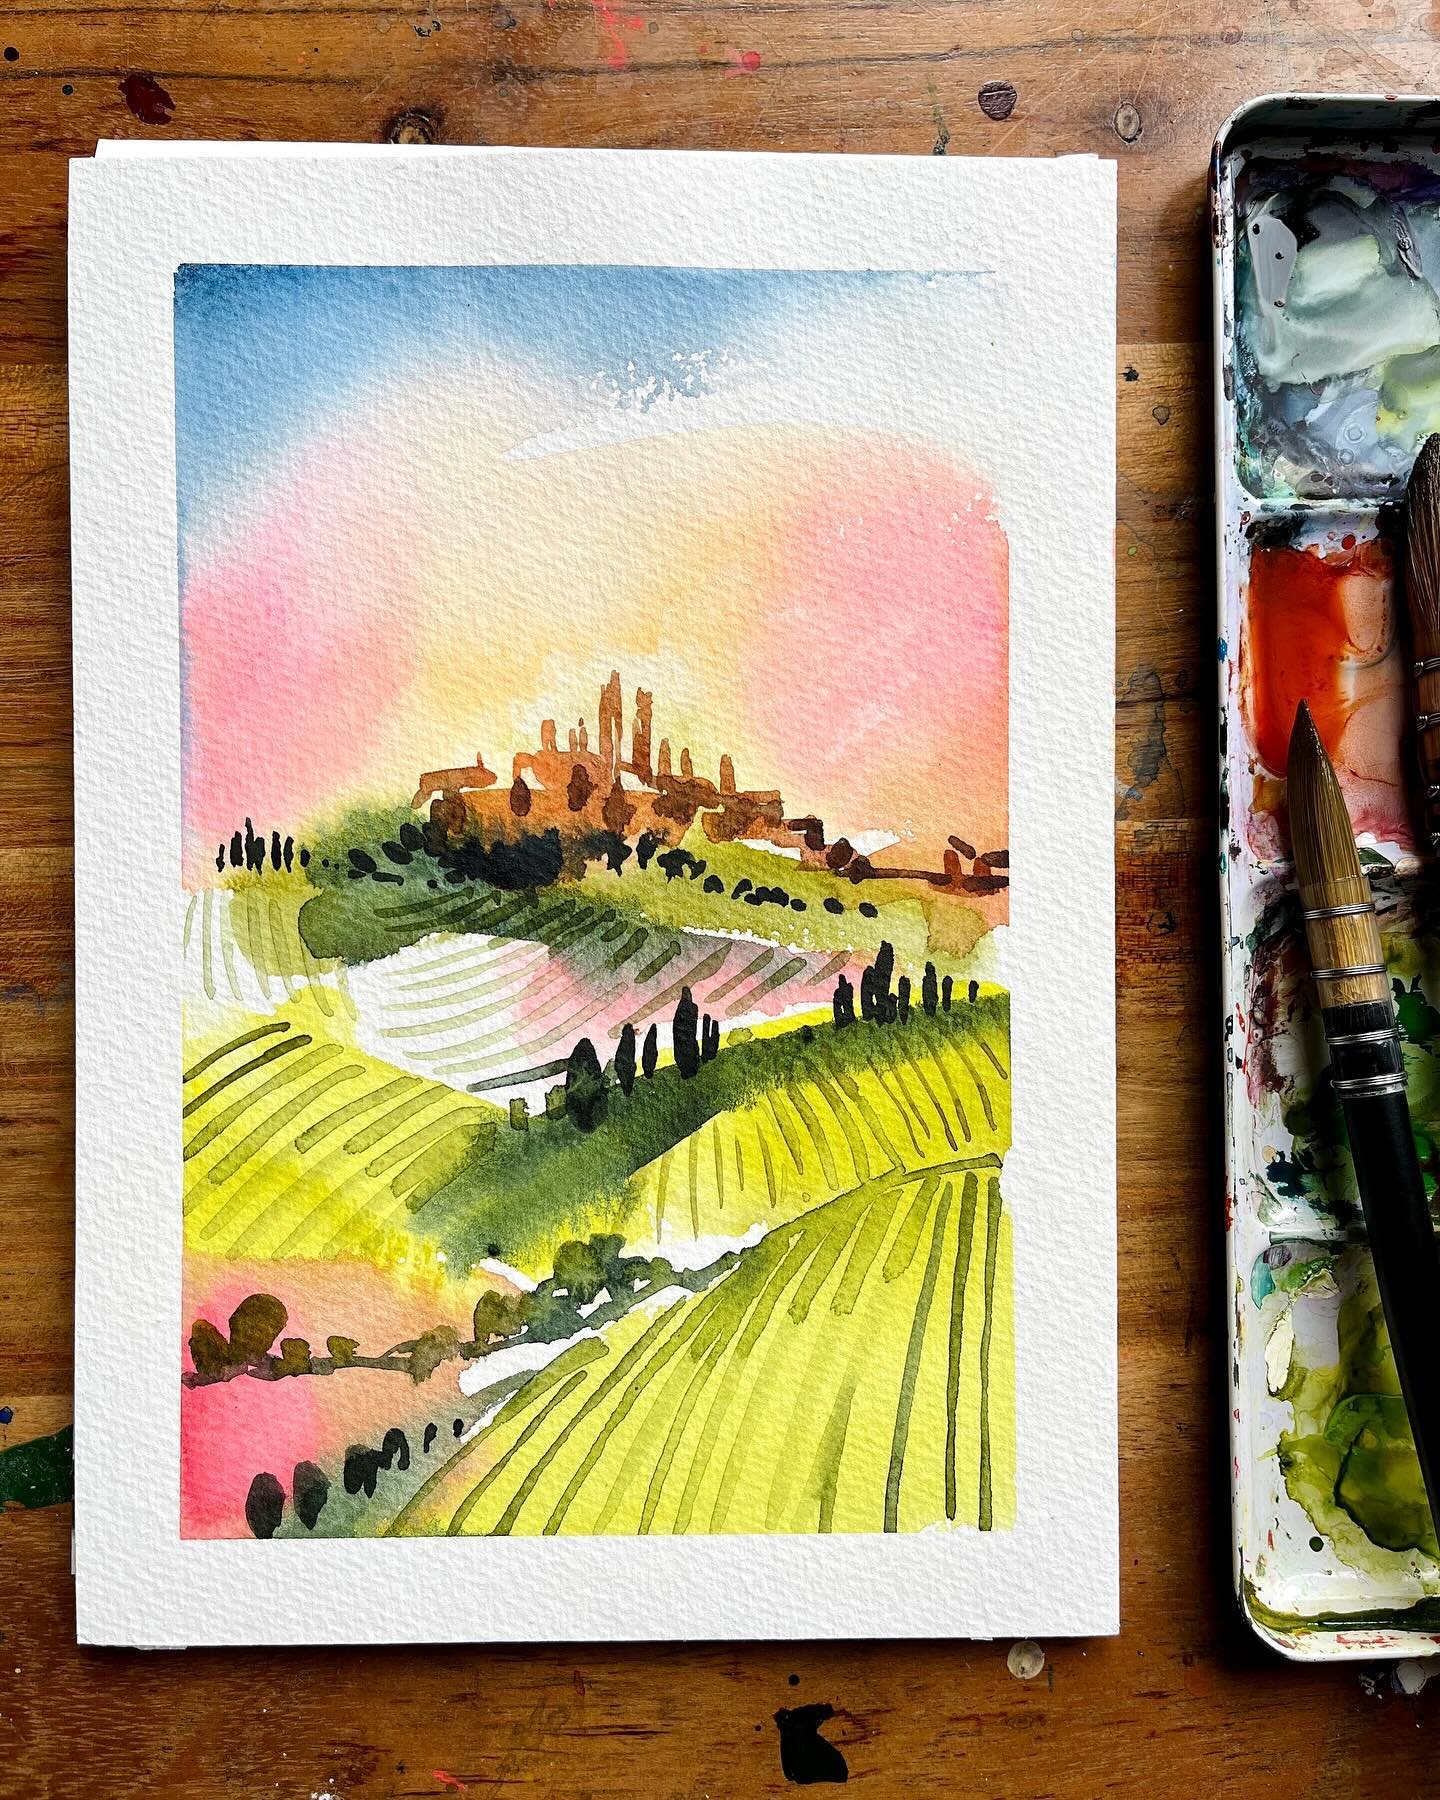 🙌Two lots of fun this week : I&rsquo;m getting ready for my watercolour landscape workshop this weekend (still a few spots available !) and tomorrow I&rsquo;m heading off to @hahnemuehle_uk booth where they&rsquo;re exhibiting @stationeryshowsuk 👋I